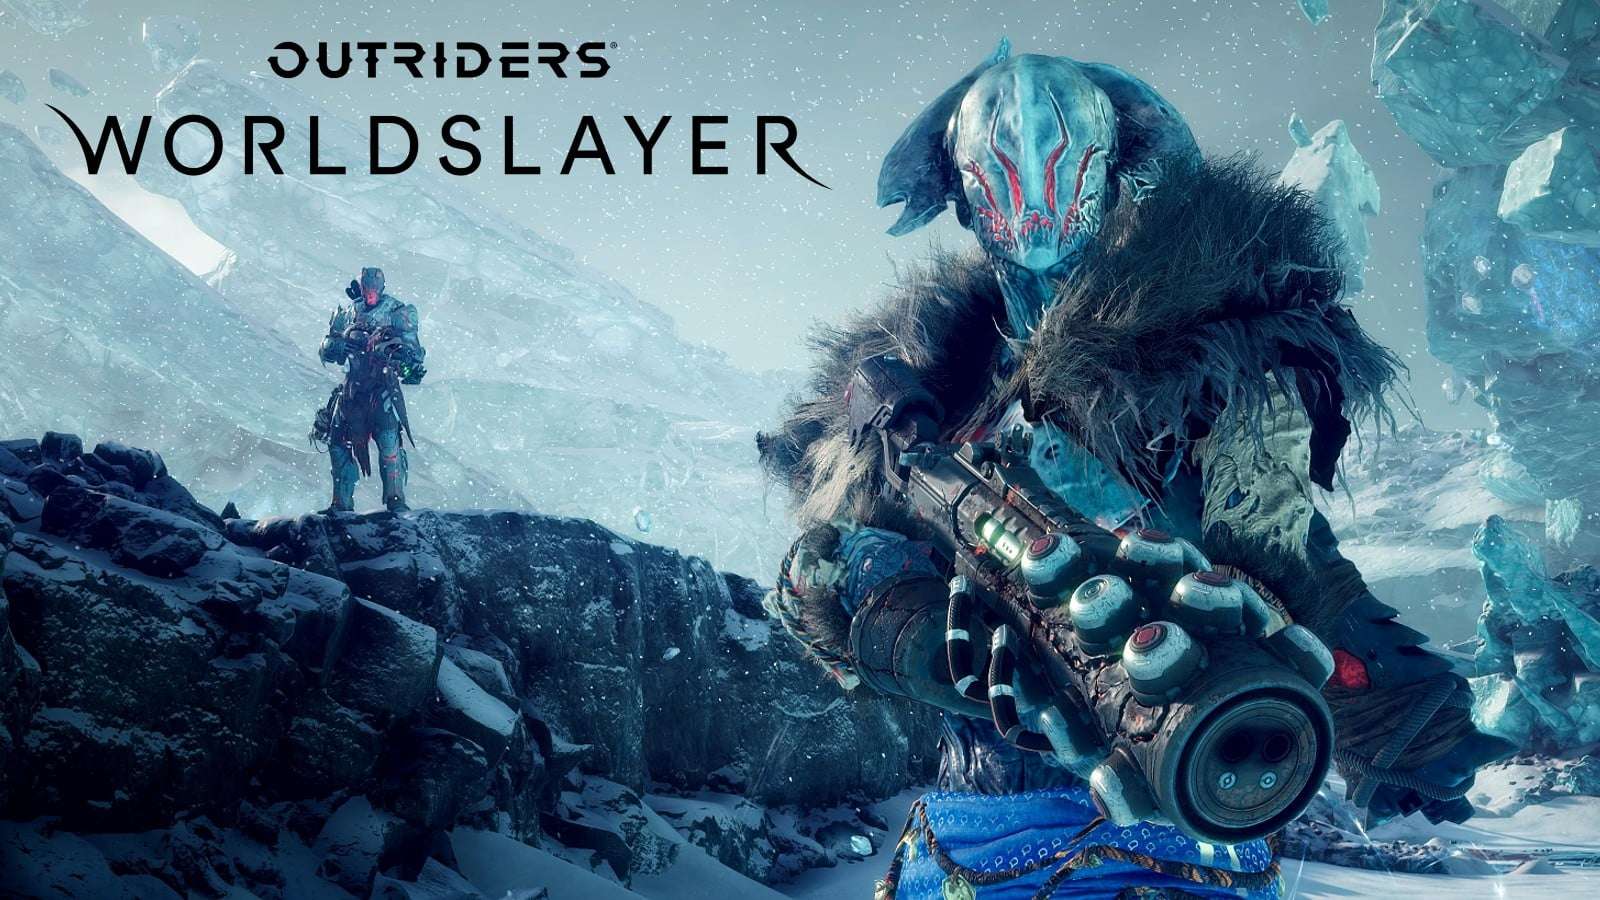 Outriders Worldslayer characters in snow